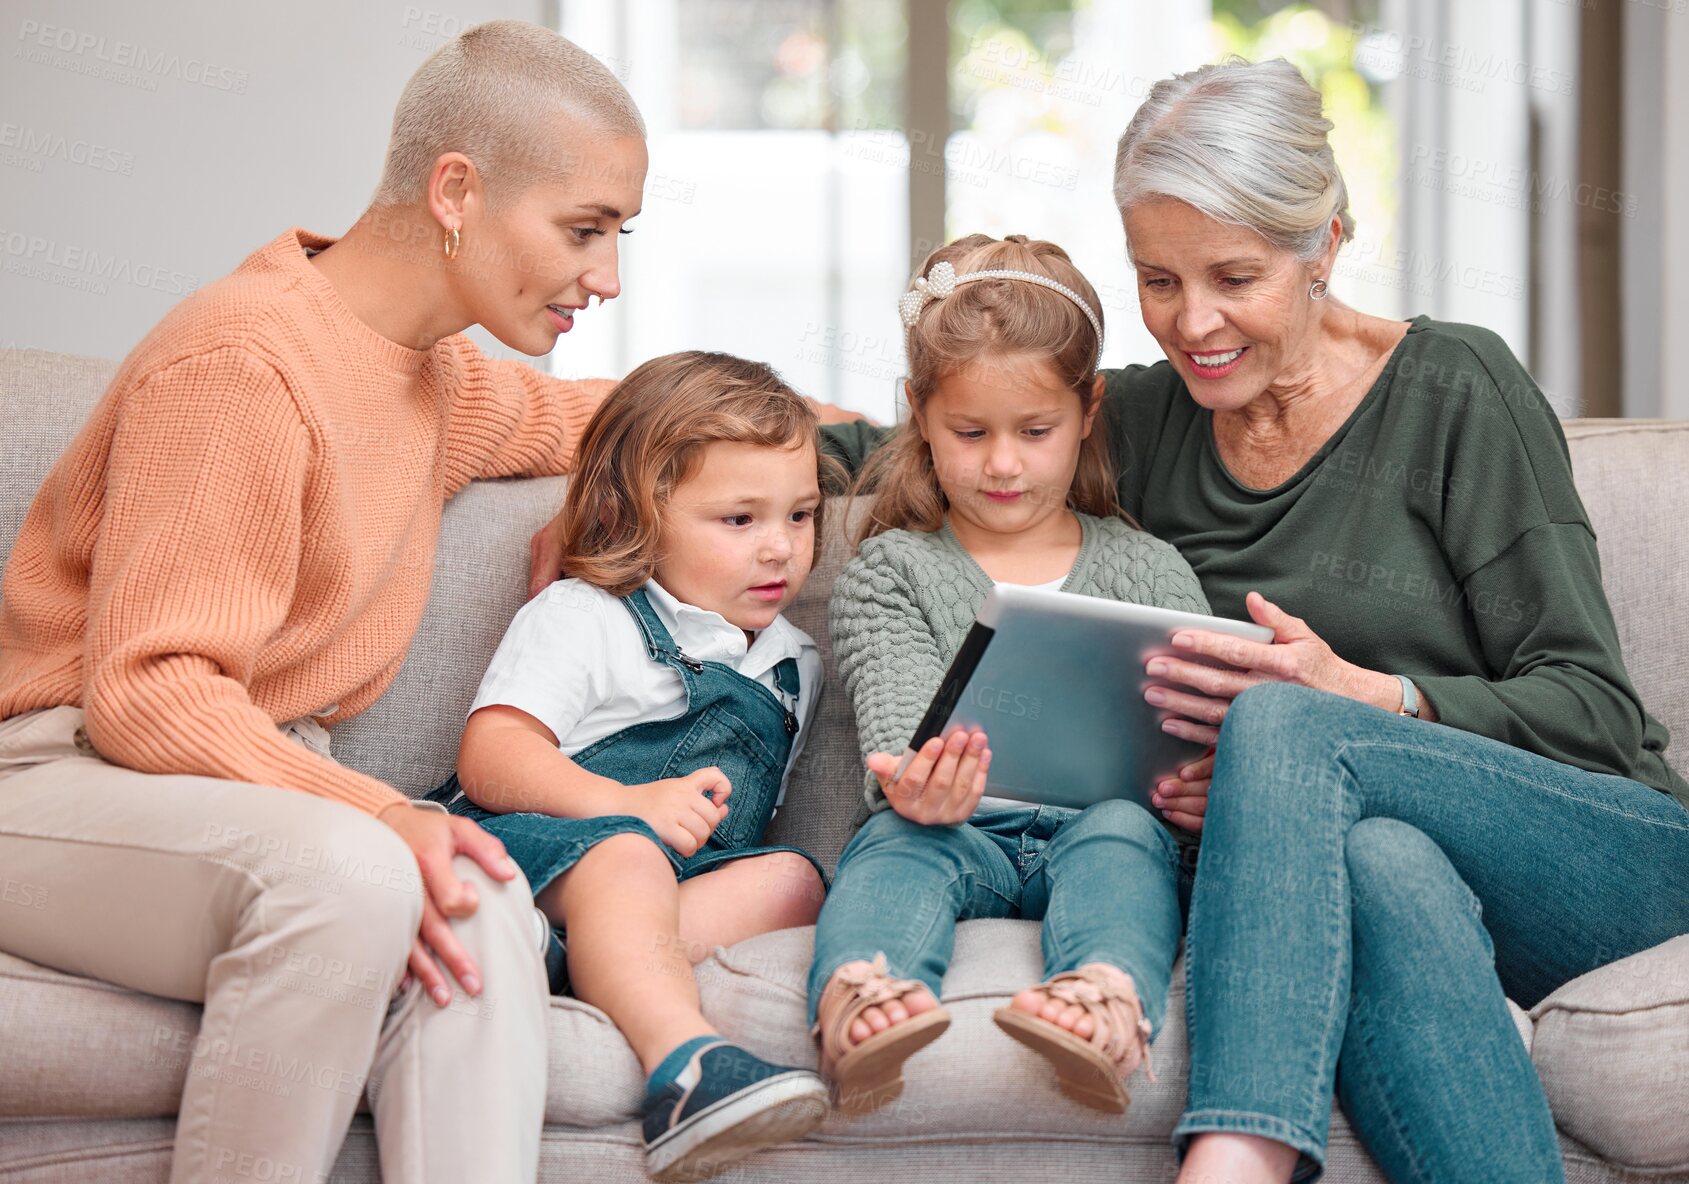 Buy stock photo Shot of a mature woman bonding with her daughter and grandkids while using a digital tablet